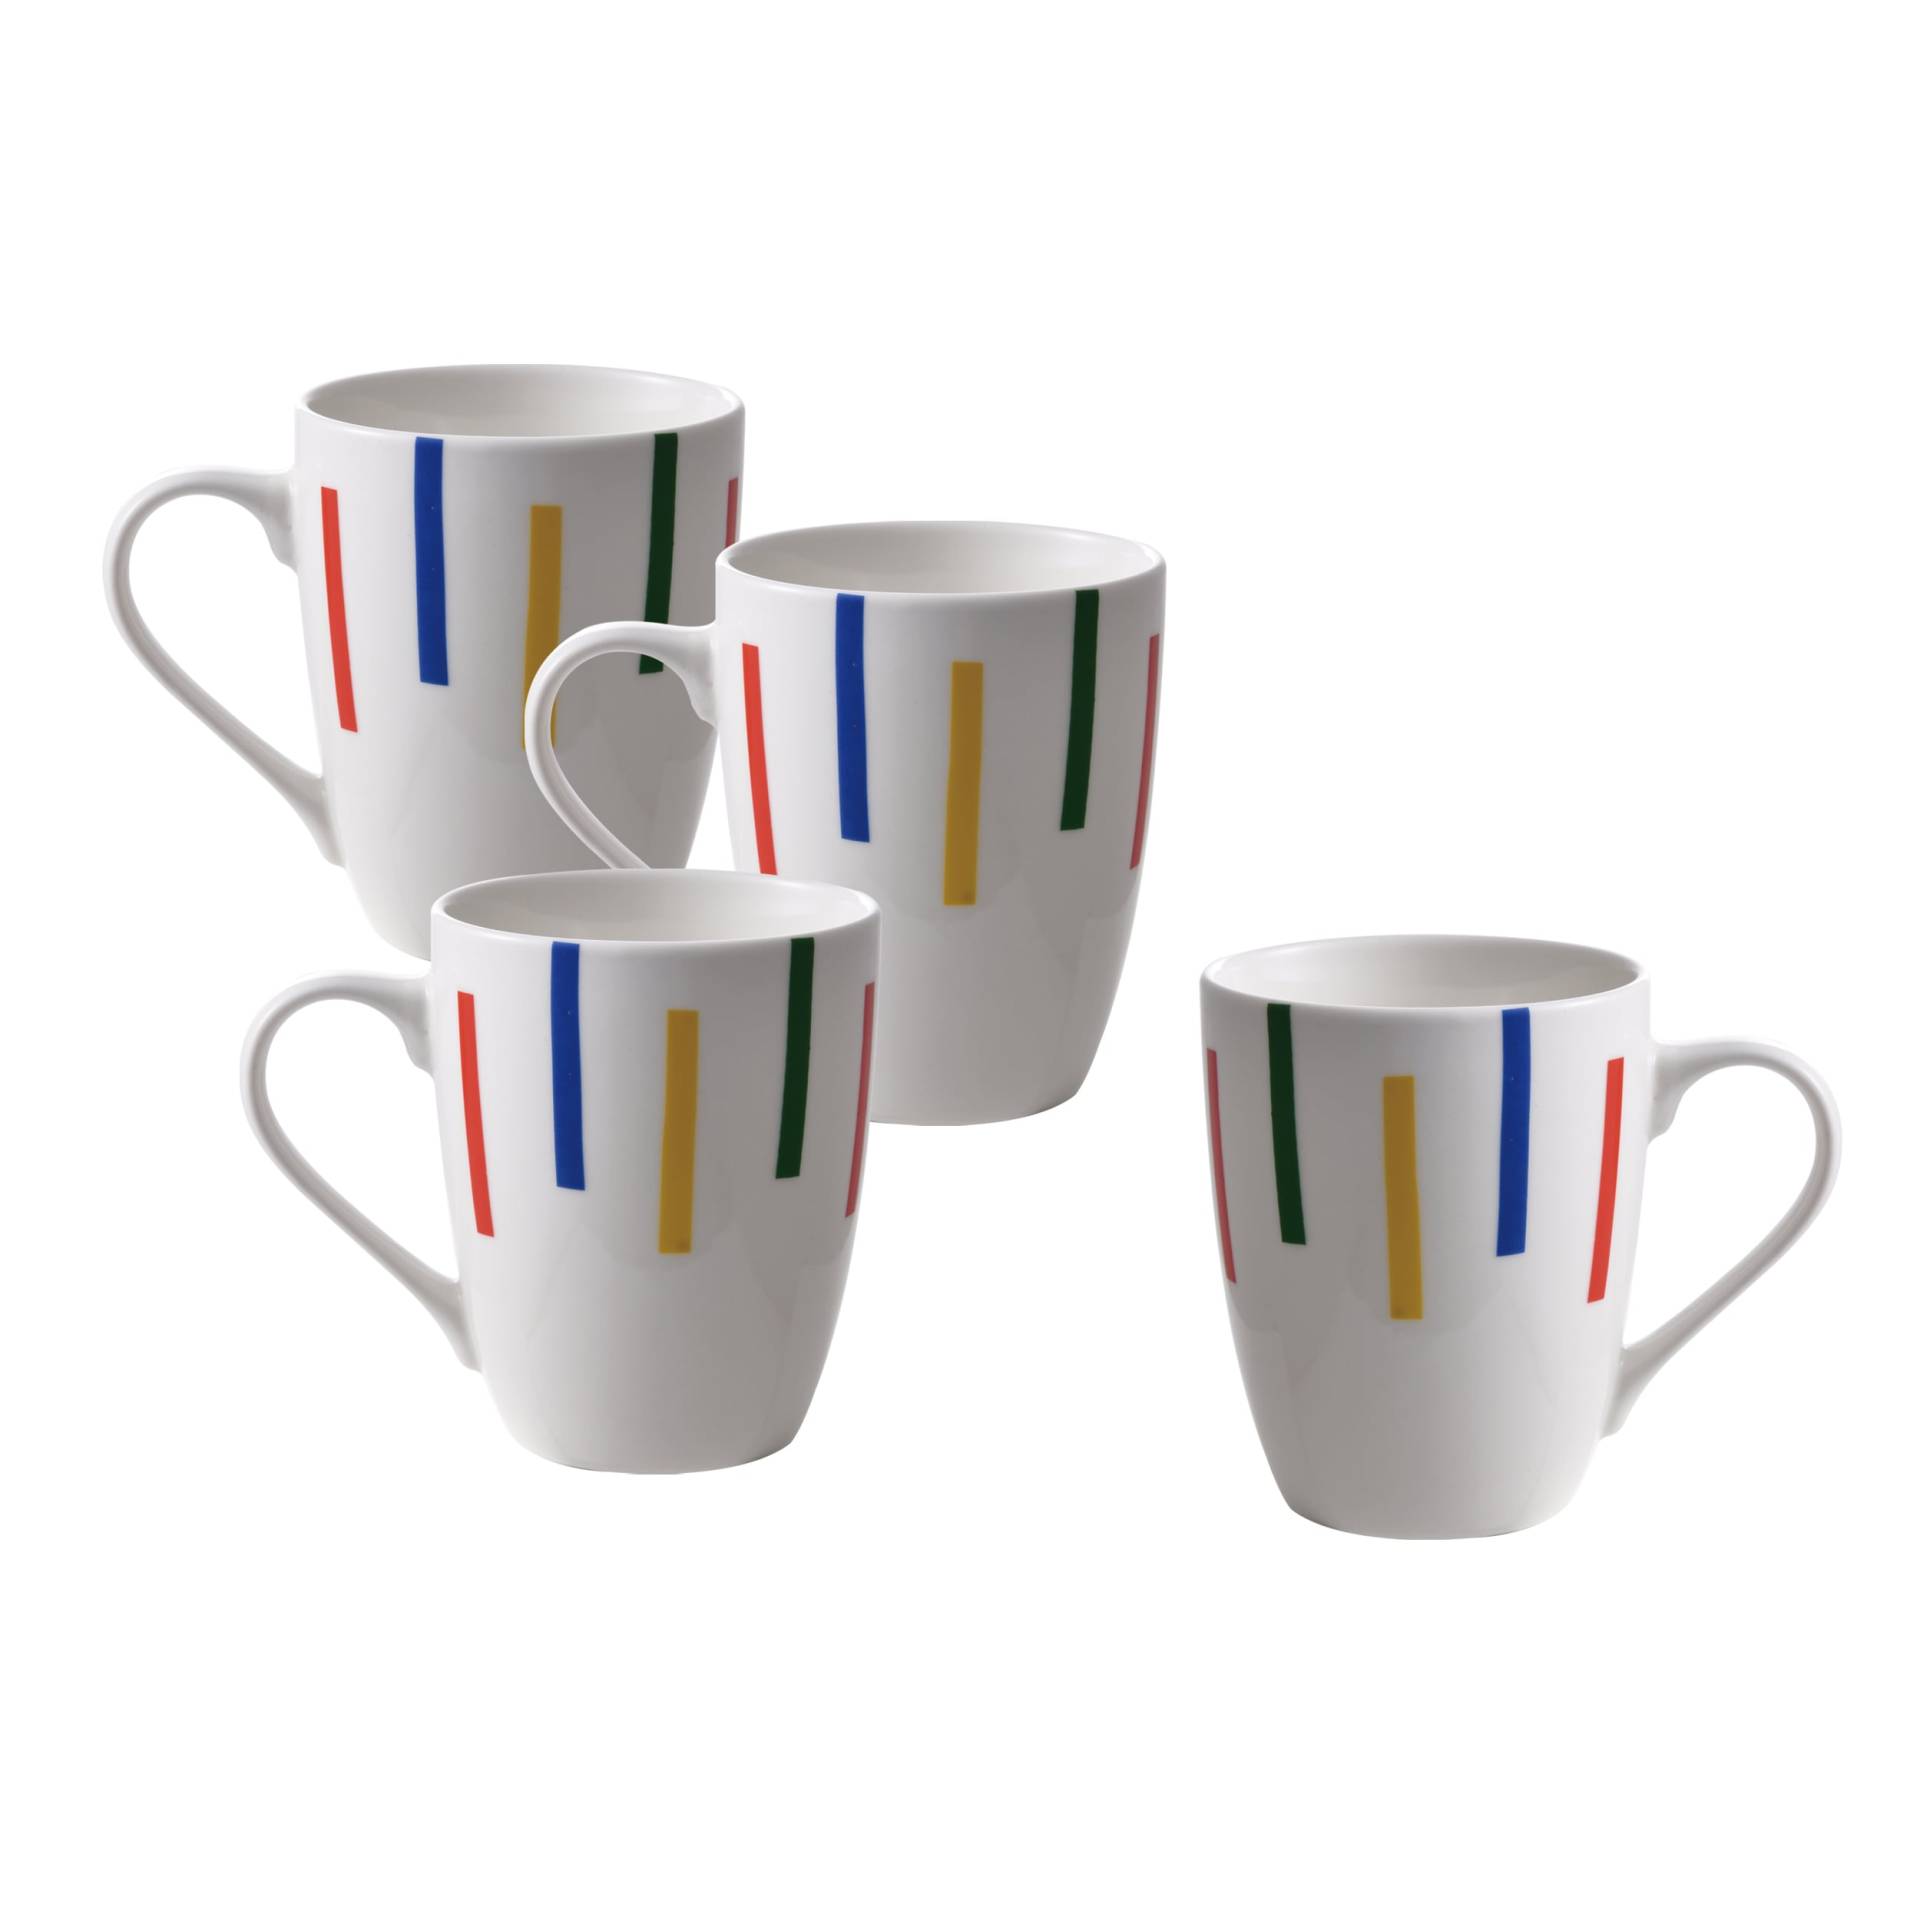 United Colors of Benetton Kaffeeservice »Kaffeetassen«, (Set, 4 tlg.) von United Colors of Benetton